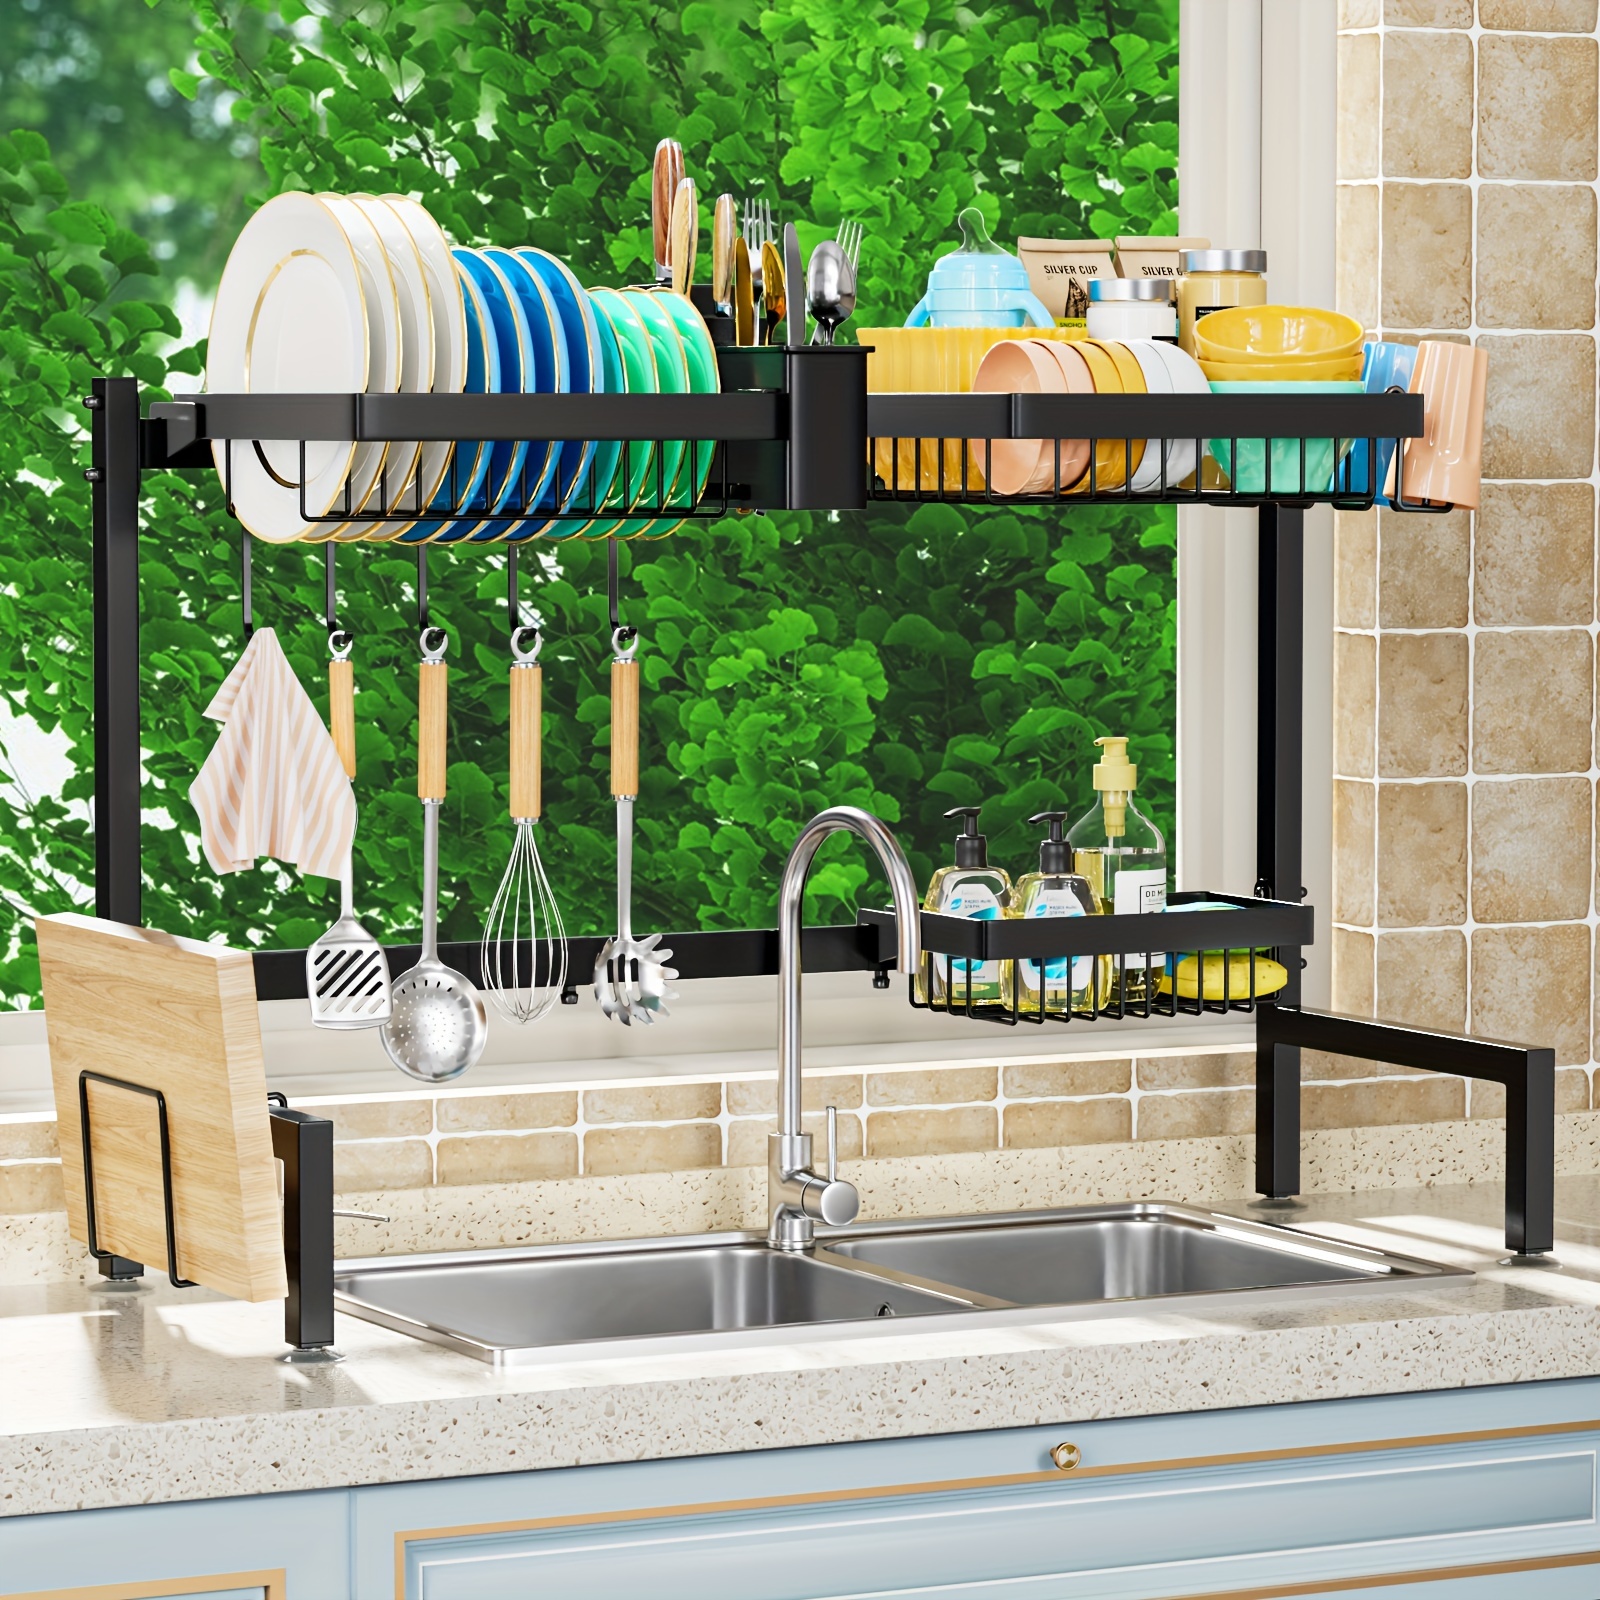 

2 Tier Over The Sink Dish Drying Rack, Kitchen Large Dish Drying Rack Over The Sink, Suitable For Single&double Sinks, Dish Rack For Kitchen, Kitchen Drying Rack 70cm/24.8in-90cm/35.4in